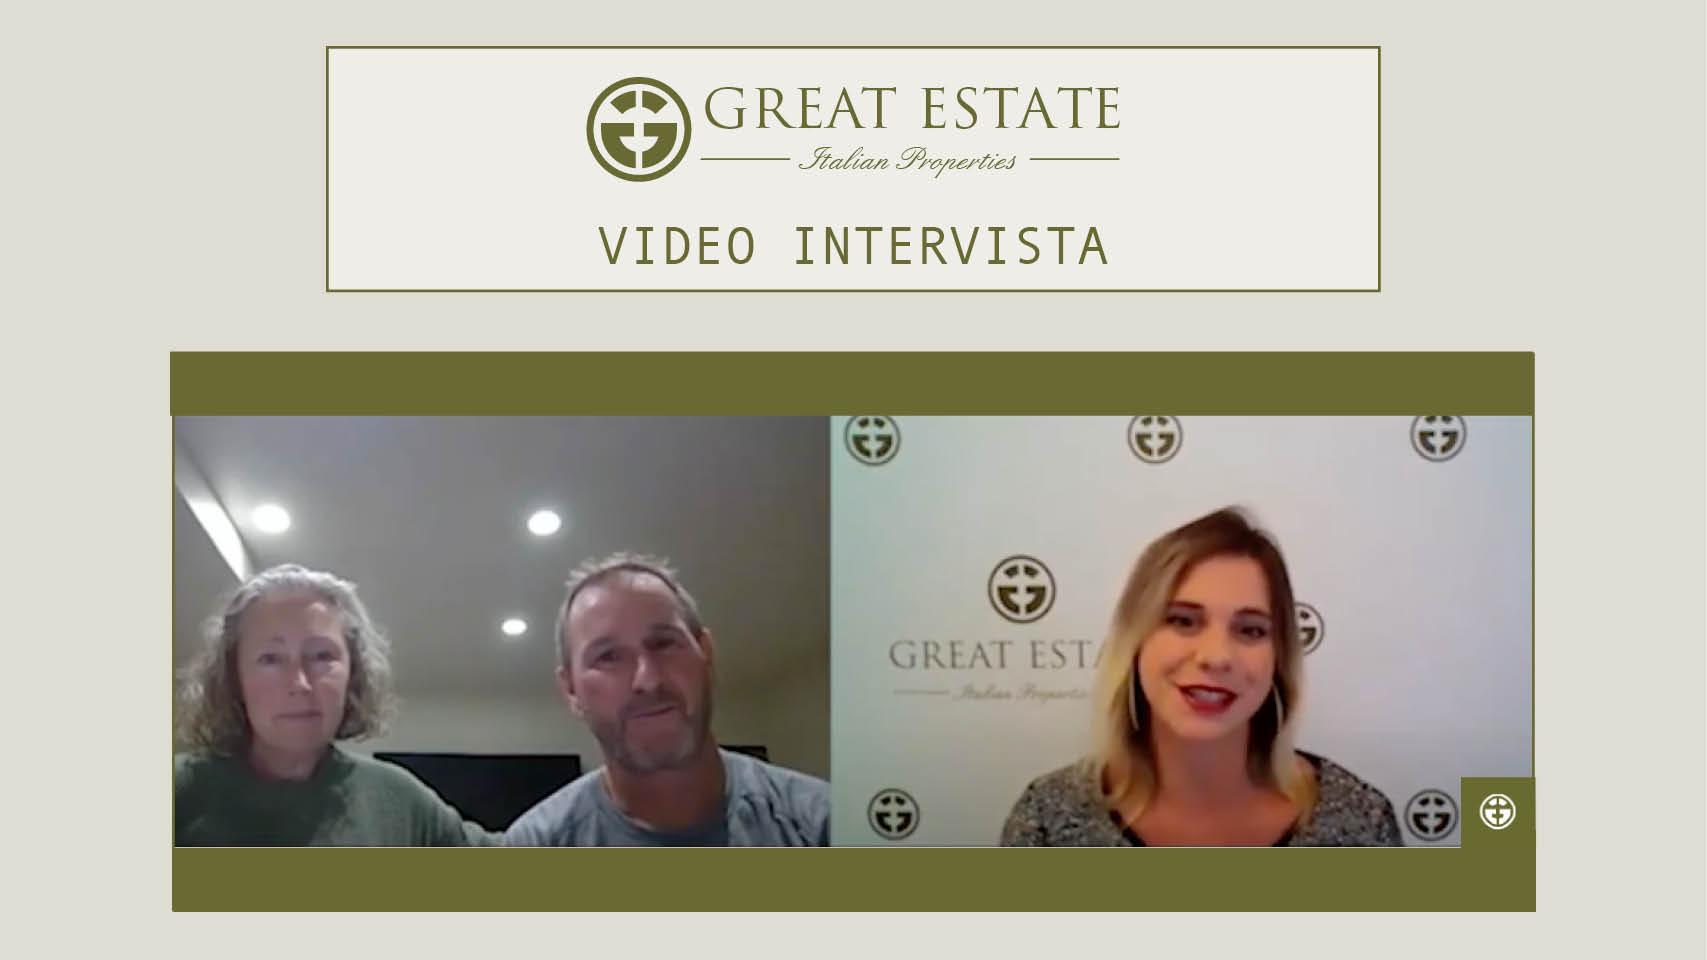 Video interview to SS. Bradshaw, new owners of casale “San Marco”